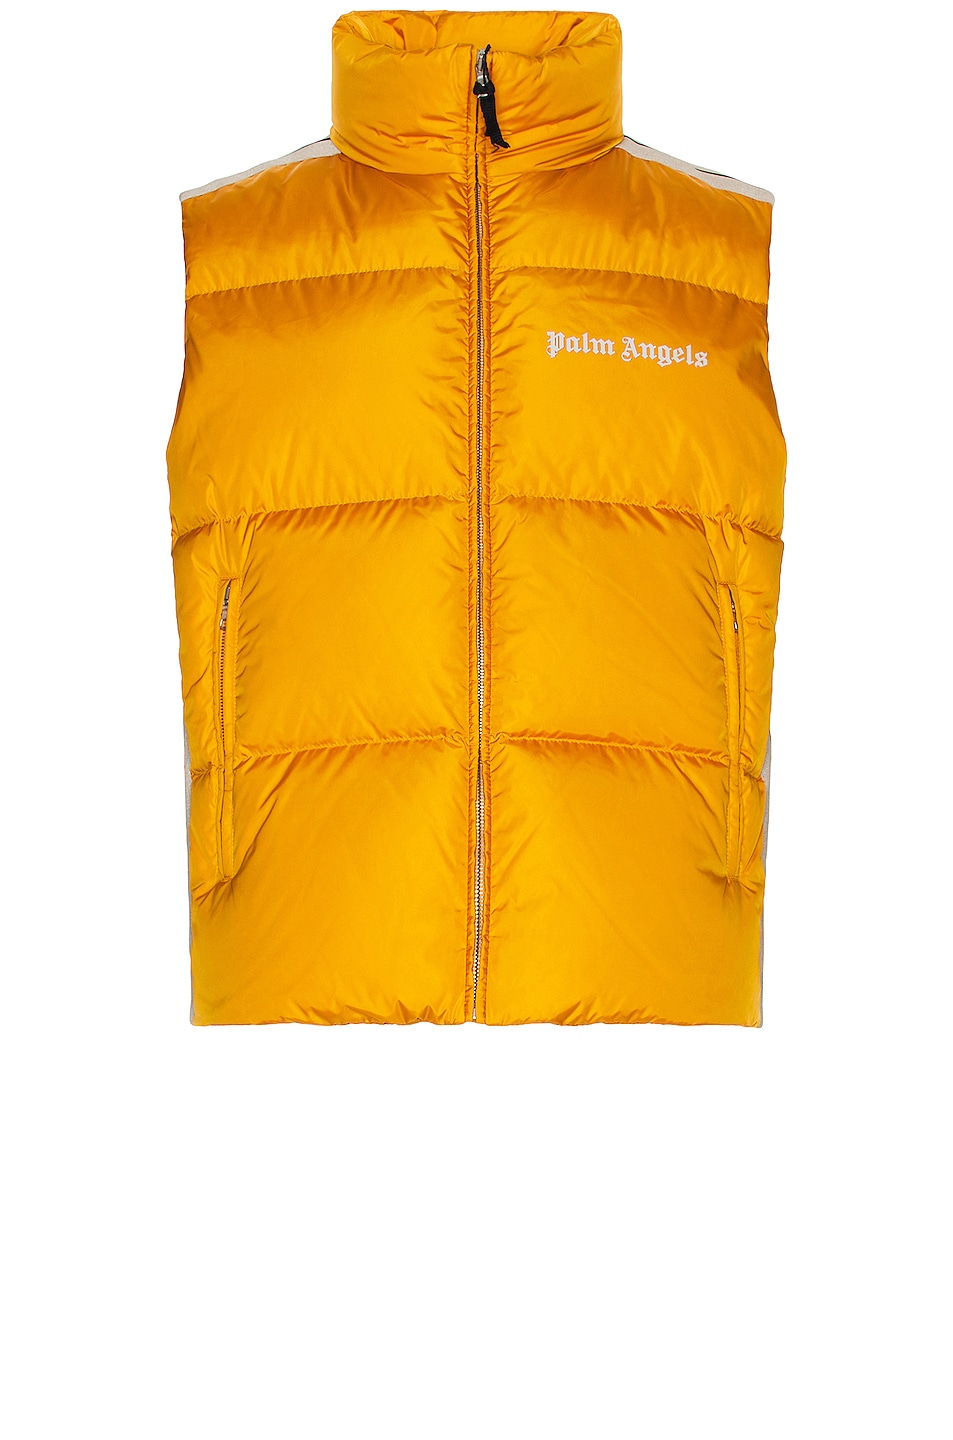 Image 1 of Moncler Genius 8 Moncler Palm Angels Rodman Vest in Yellow